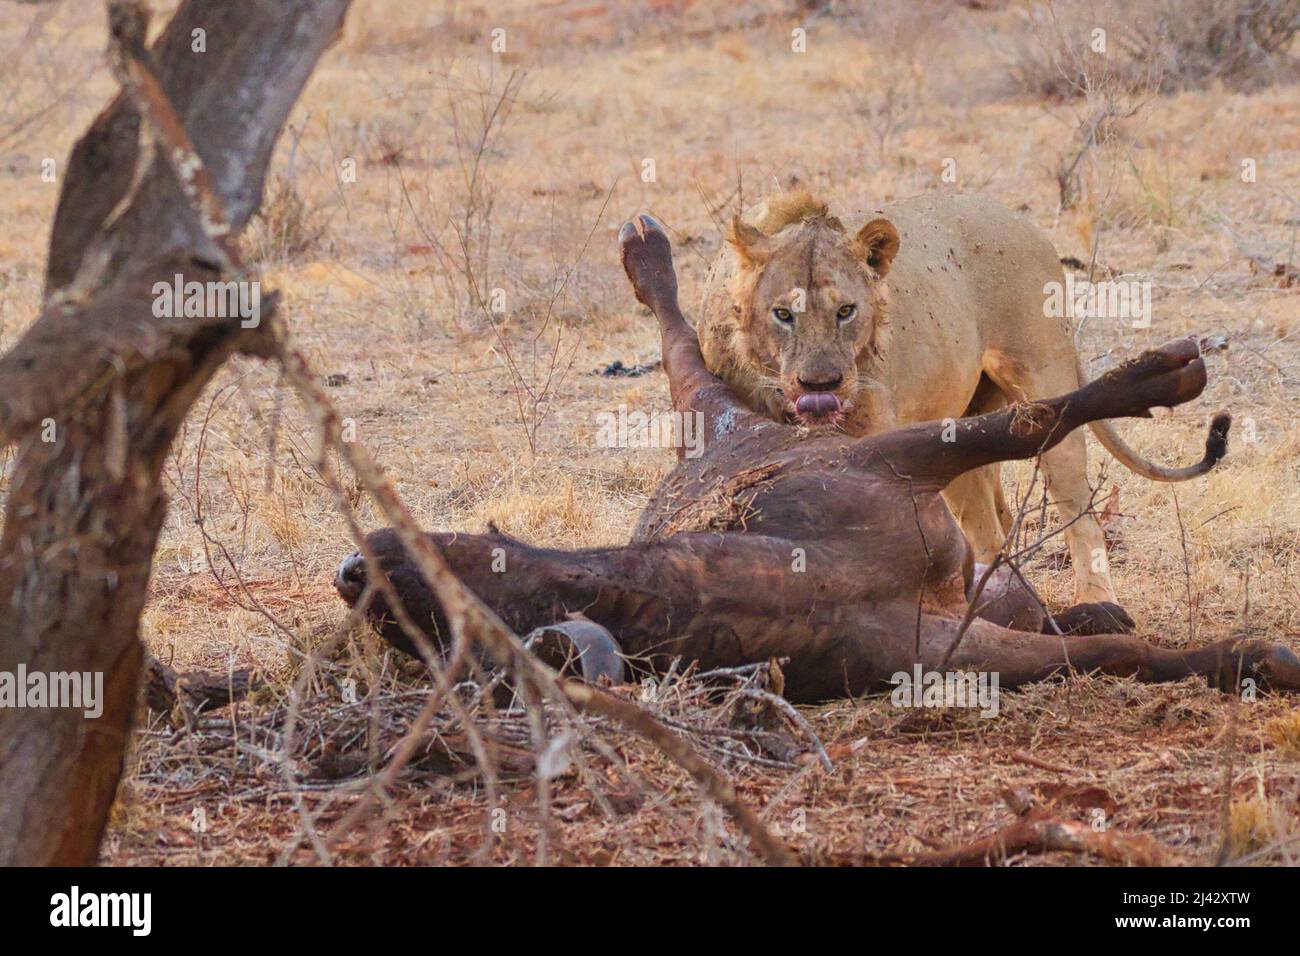 Lion with a dead African buffalo as prey. Stock Photo